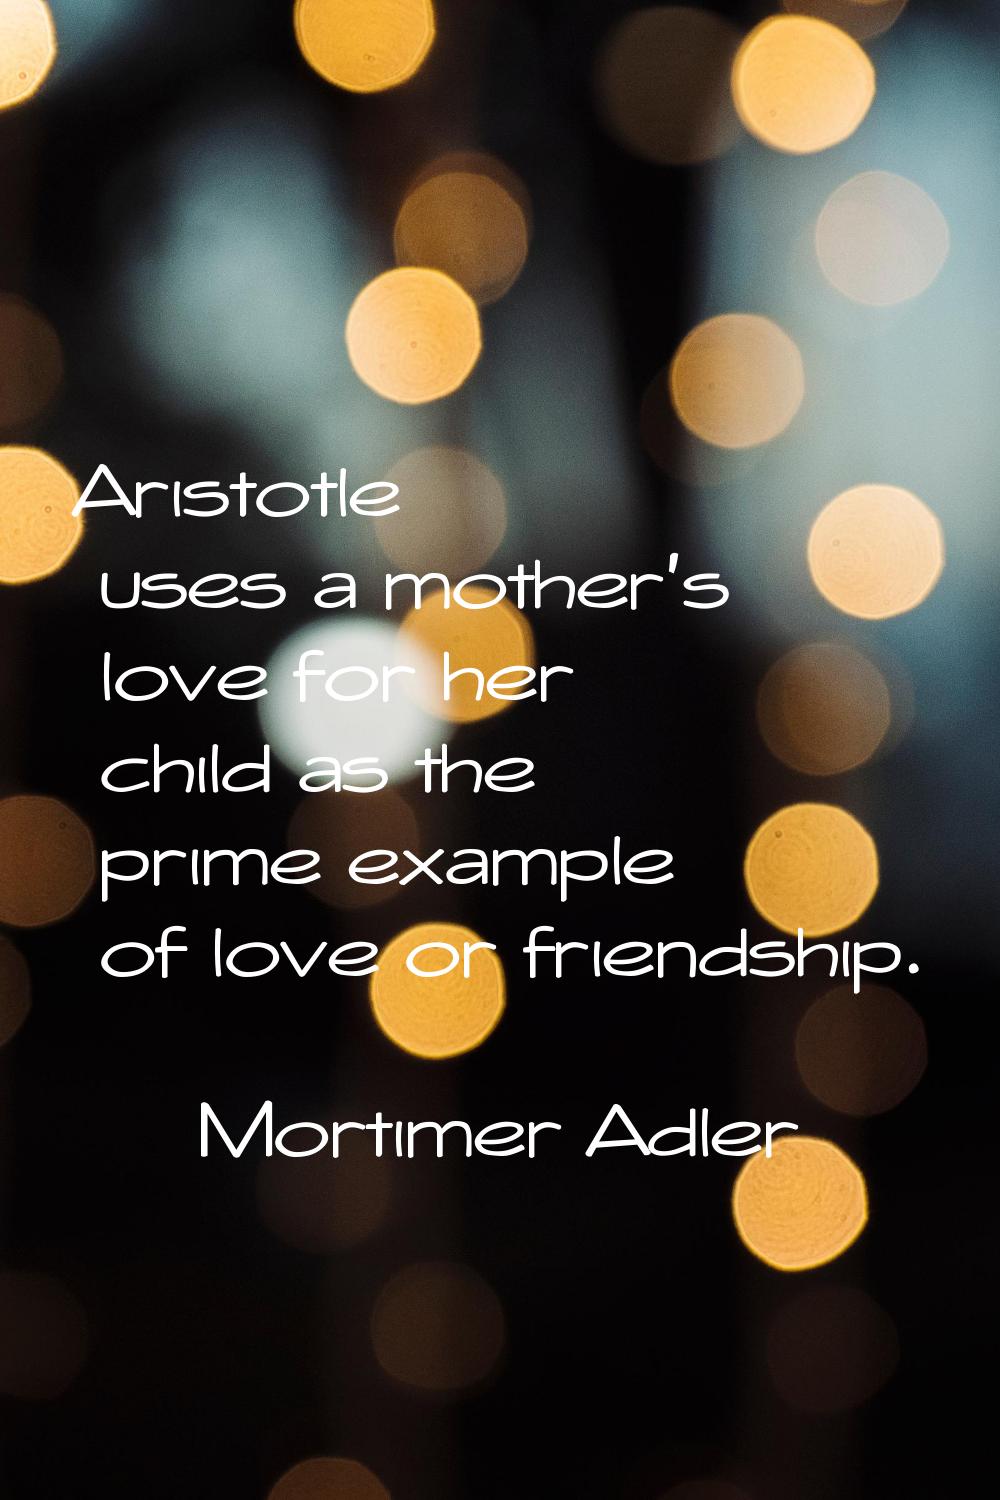 Aristotle uses a mother's love for her child as the prime example of love or friendship.